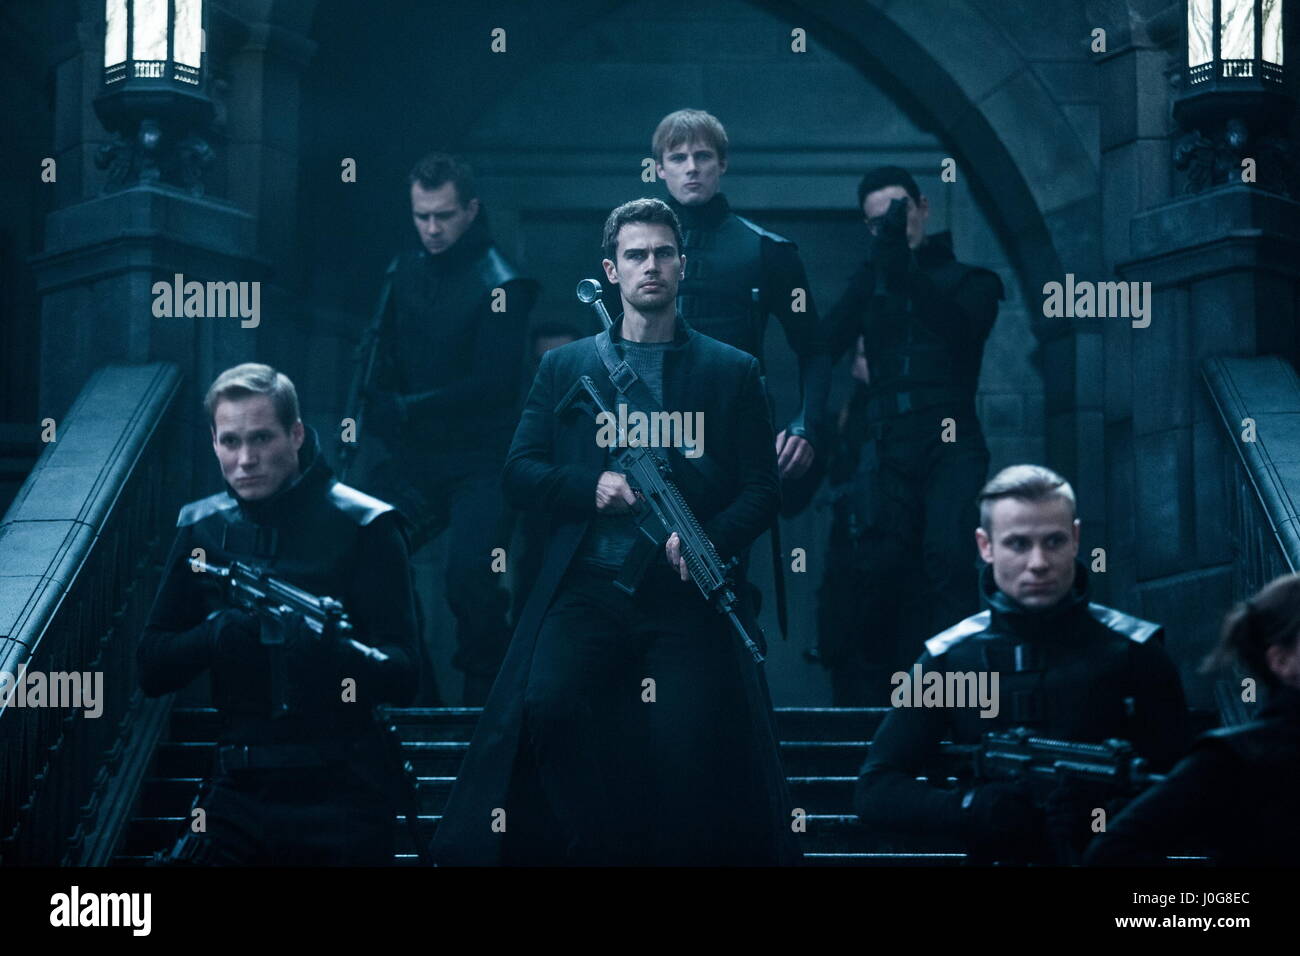 RELEASE DATE: January 6, 2017 TITLE: Underworld: Blood Wars STUDIO: Sony Pictures DIRECTOR: Anna Foerster PLOT: Vampire death dealer, Selene (Kate Beckinsale) fights to end the eternal war between the Lycan clan and the Vampire faction that betrayed her STARRING: Theo James (center-front), Bradley James (center-rear). (Credit Image: © Sony Pictures/Entertainment Pictures/ZUMAPRESS.com) Stock Photo